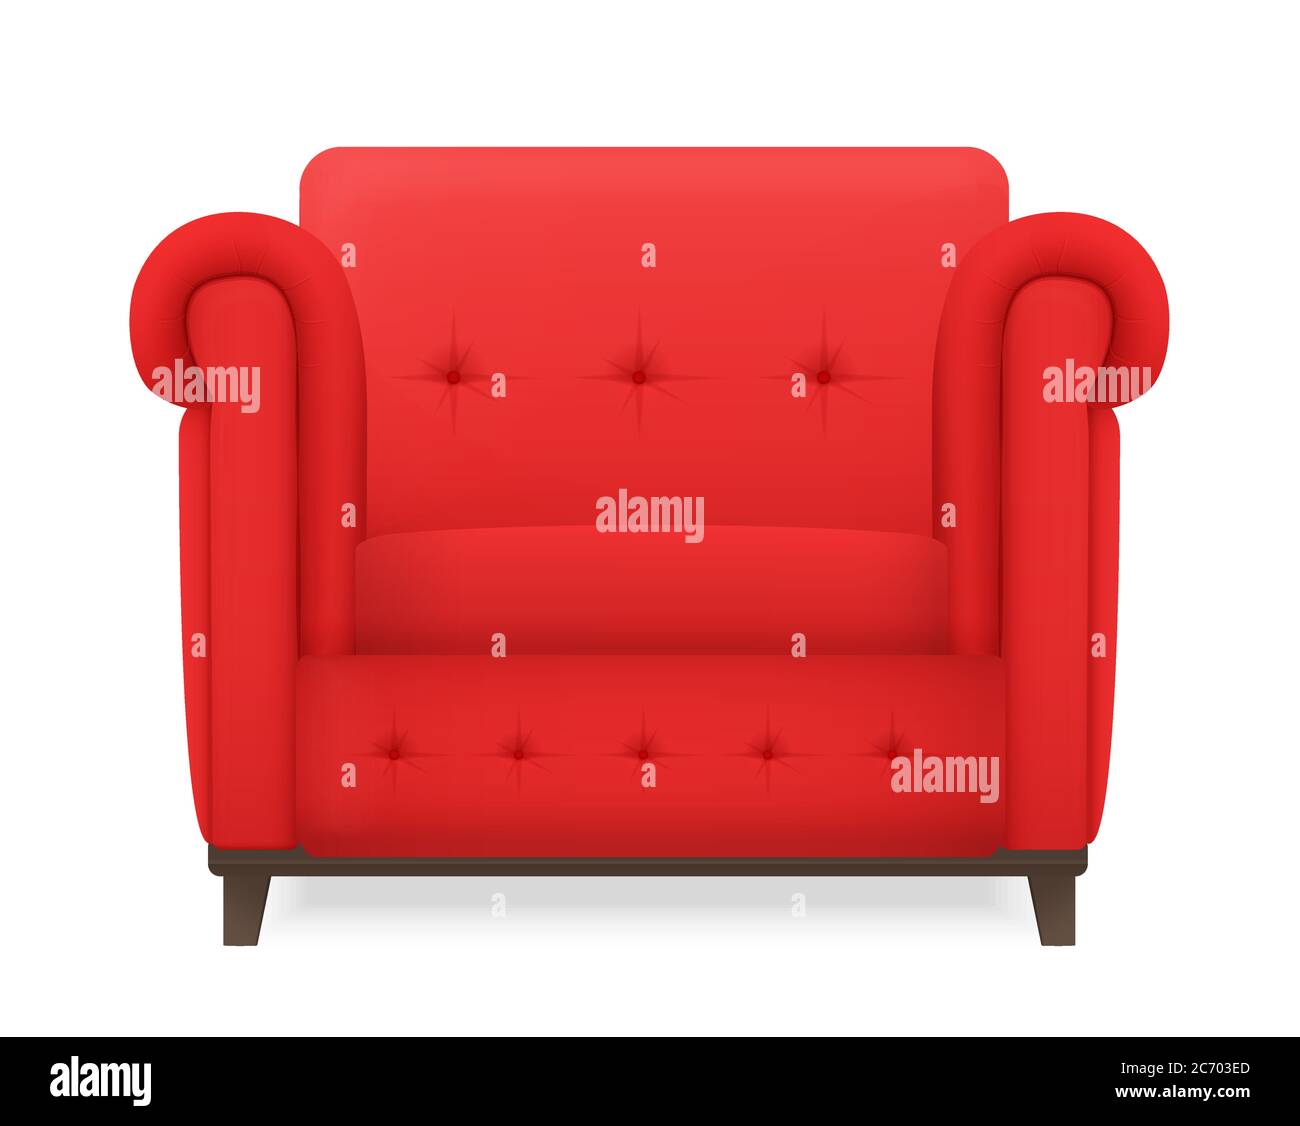 Vector realistic red leather armchear isolated illustration Stock Vector